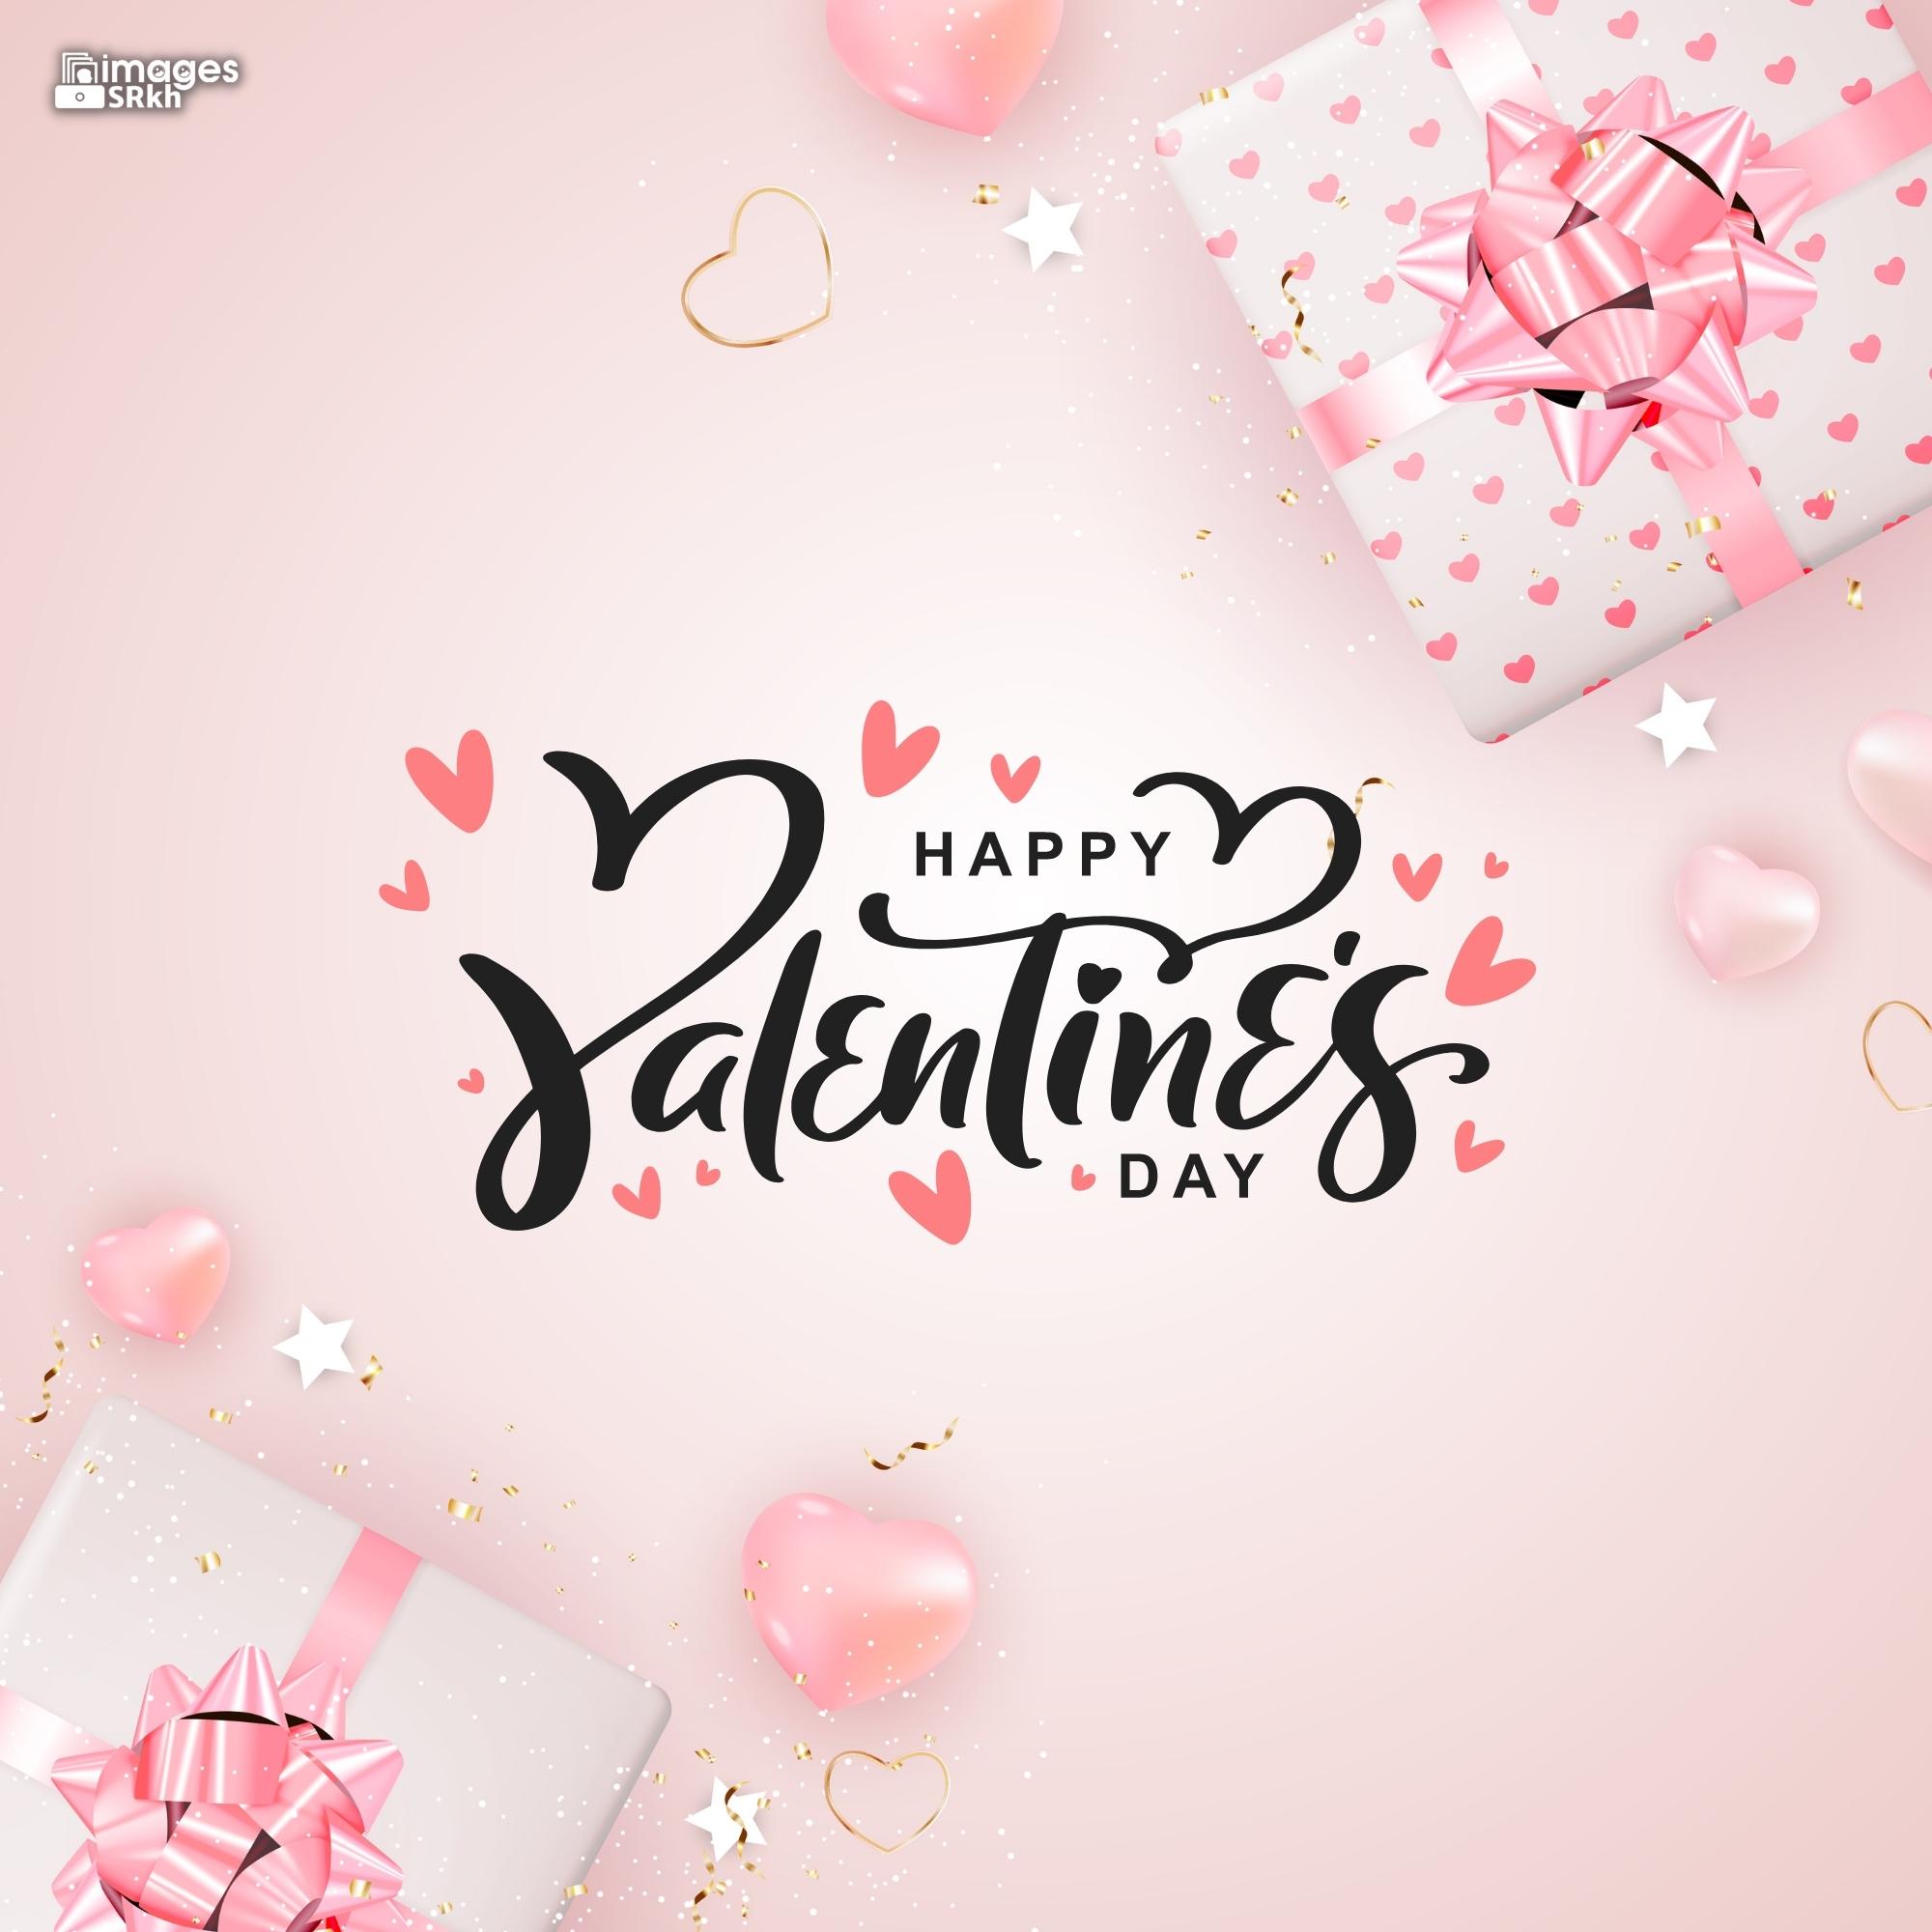 Happy Valentines Day | 551 | PREMIUM IMAGES | Wishes for Love